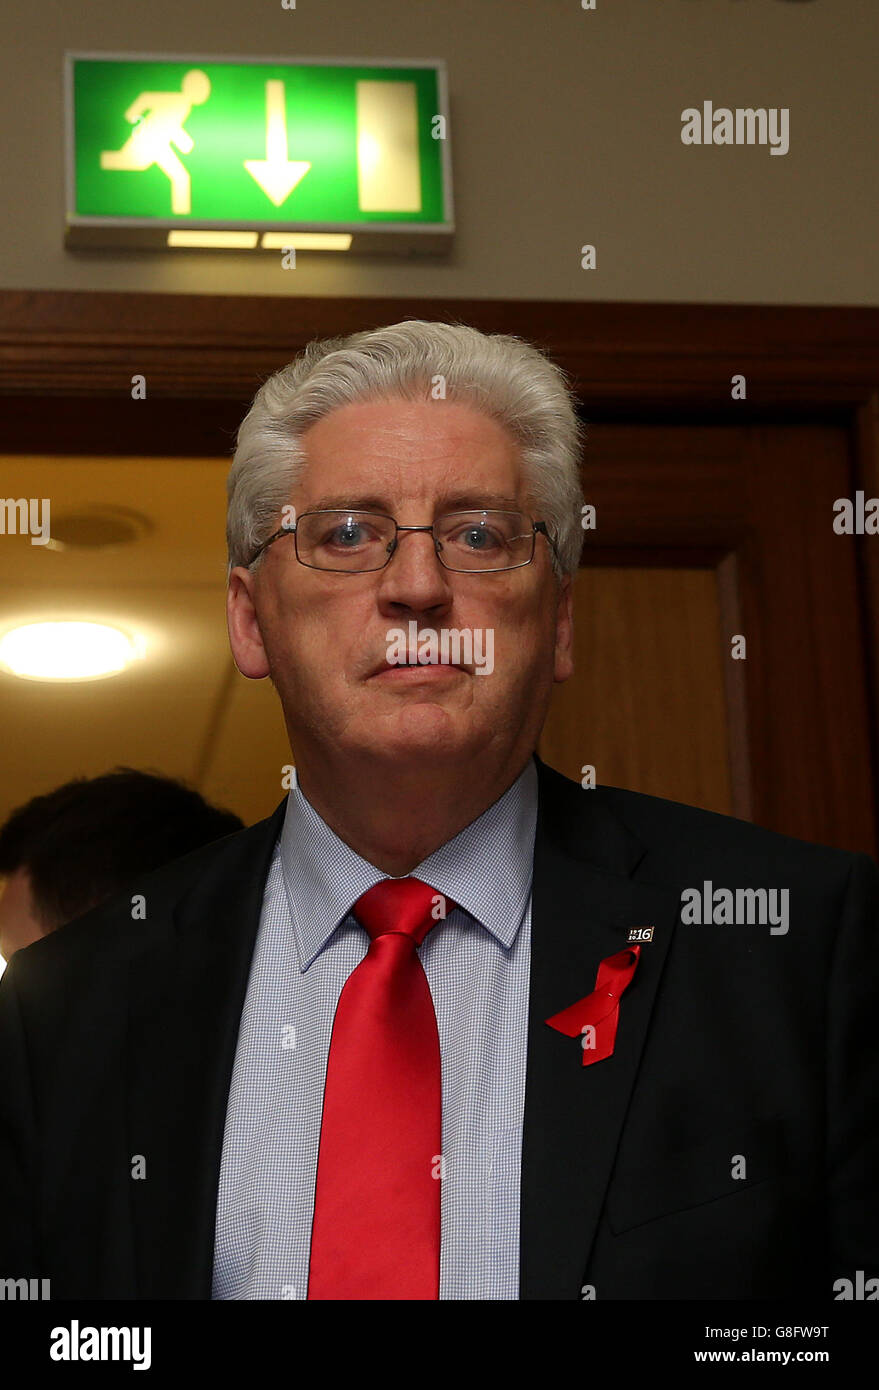 Outgoing Social Democratic and Labour Party (SDLP) leader Alasdair McDonnell at the Armagh City Hotel, Armagh, ahead of the announcement of the results of the leadership contest. Stock Photo